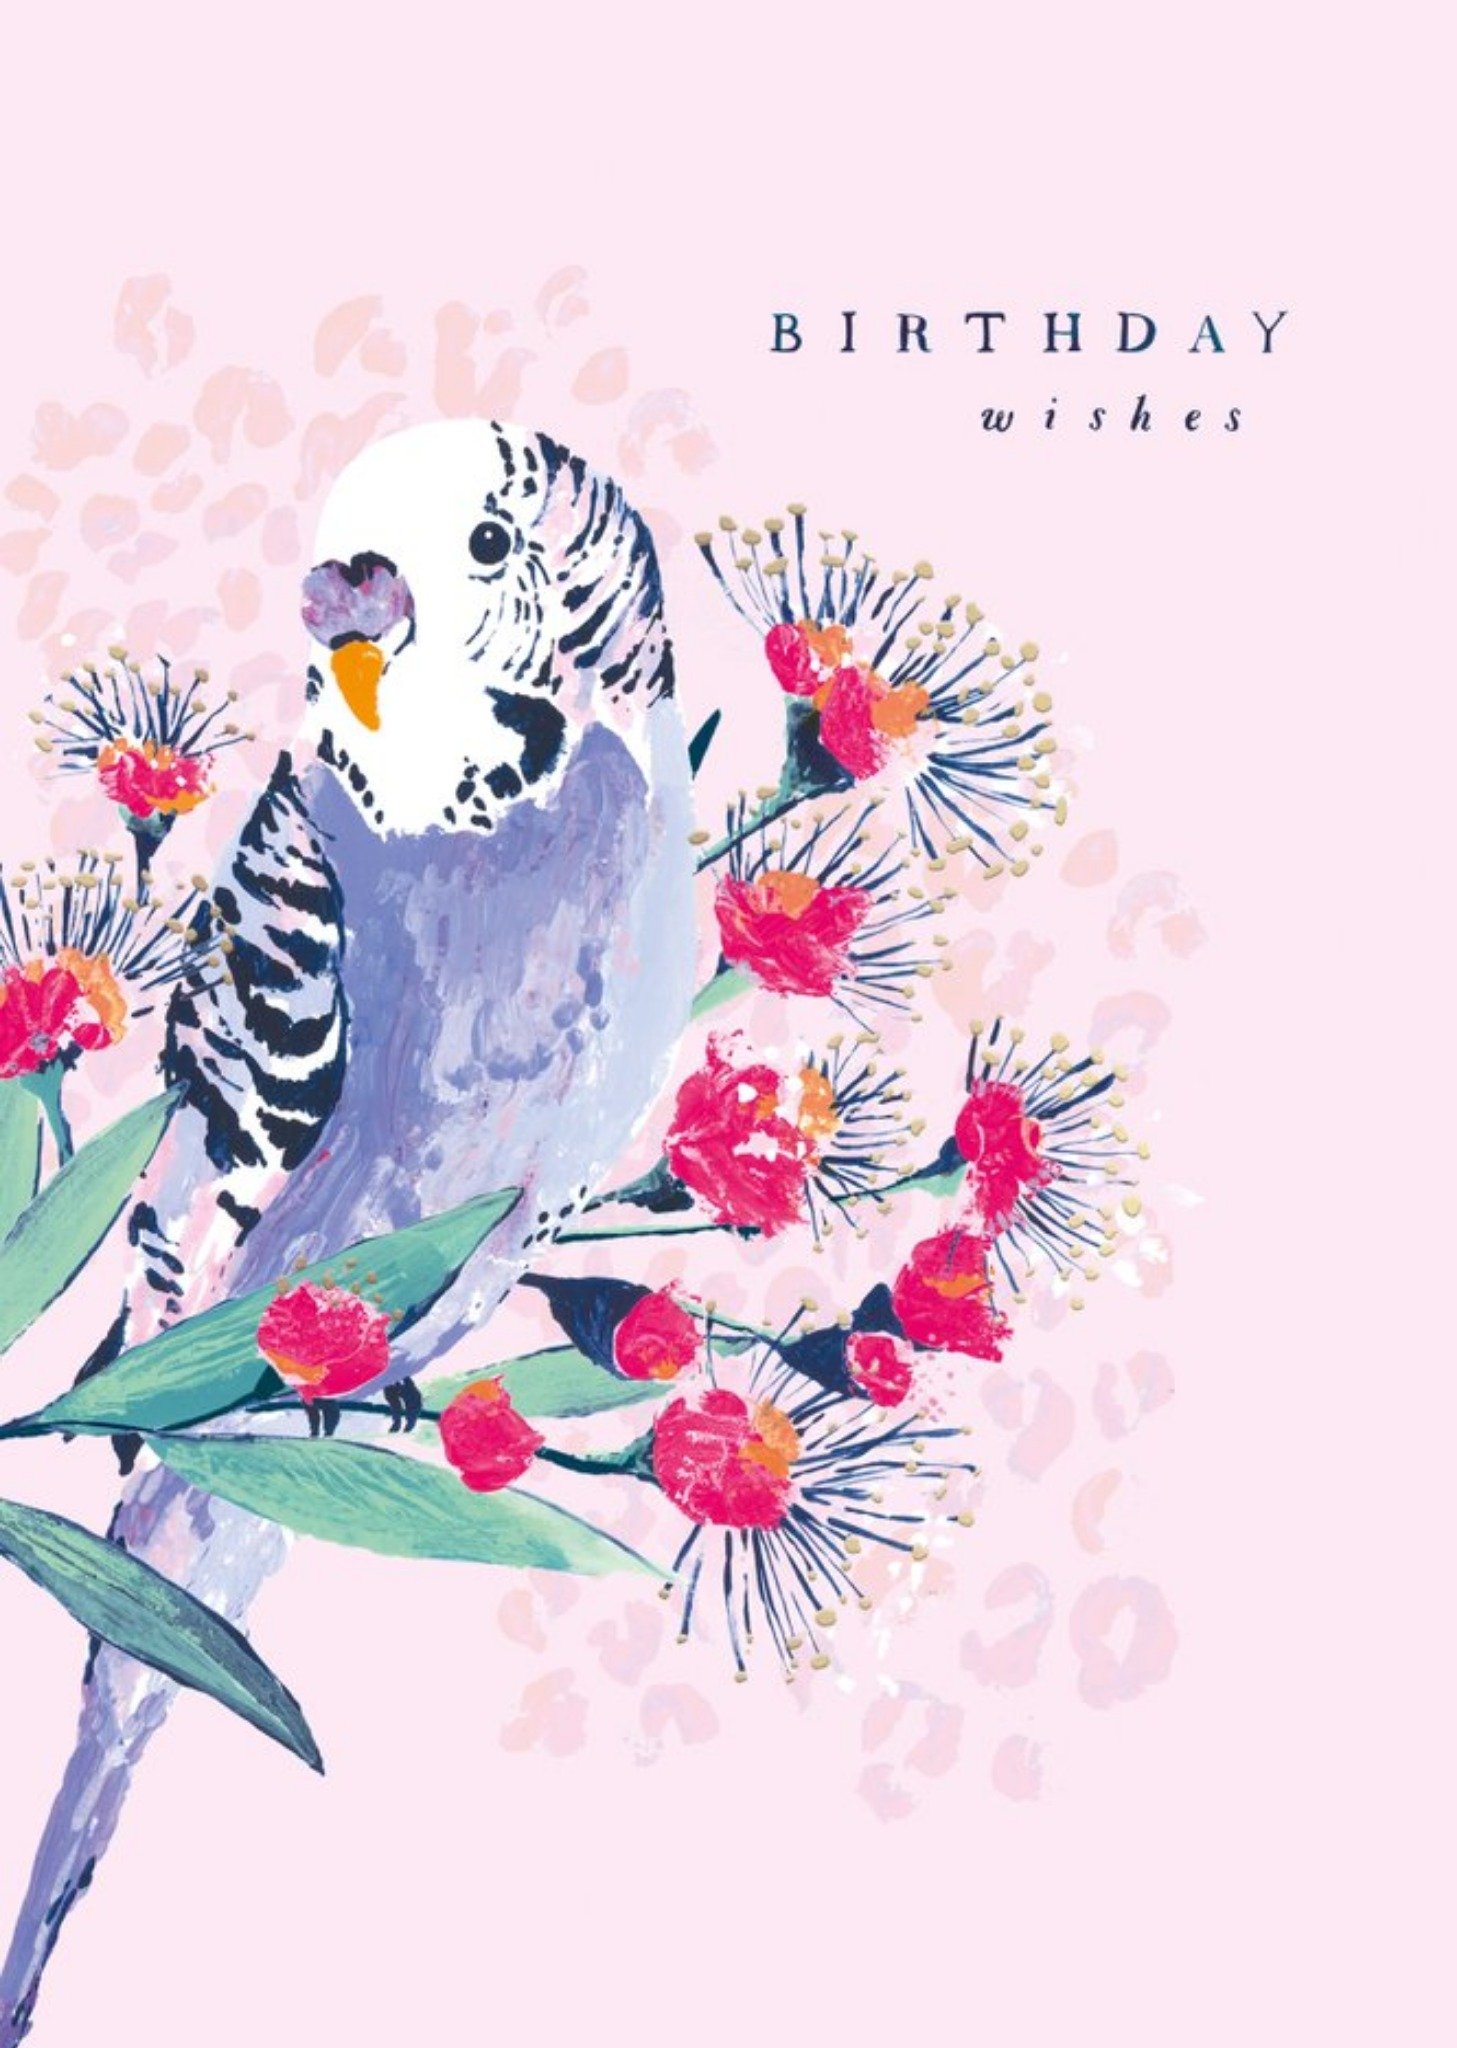 Moonpig Bird Floral Paint Birthday Wishes Card, Large